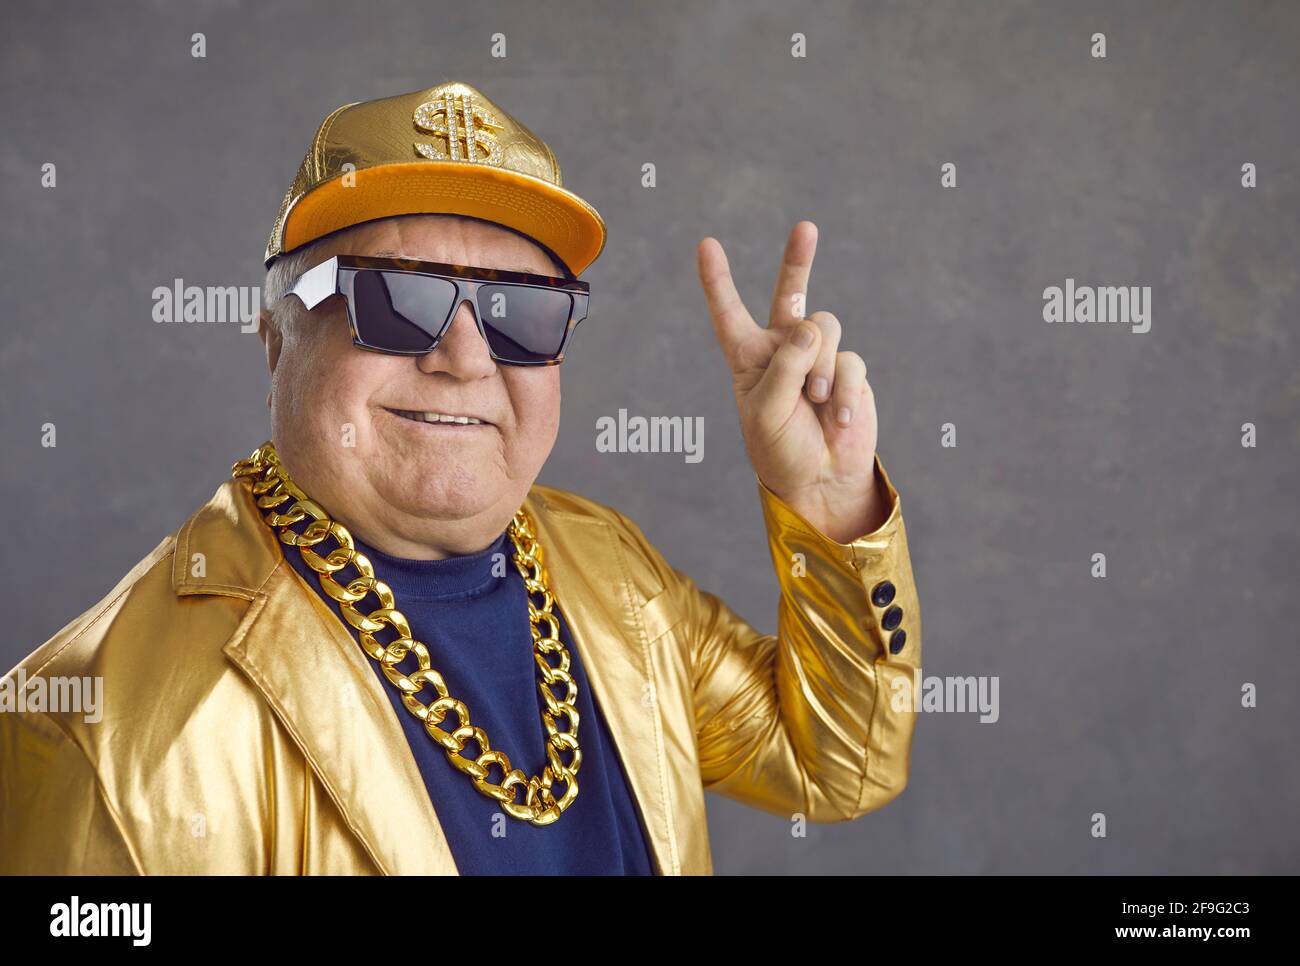 Funny and cheerful senior man in luxury clothes showing v-sign on gray background. Stock Photo